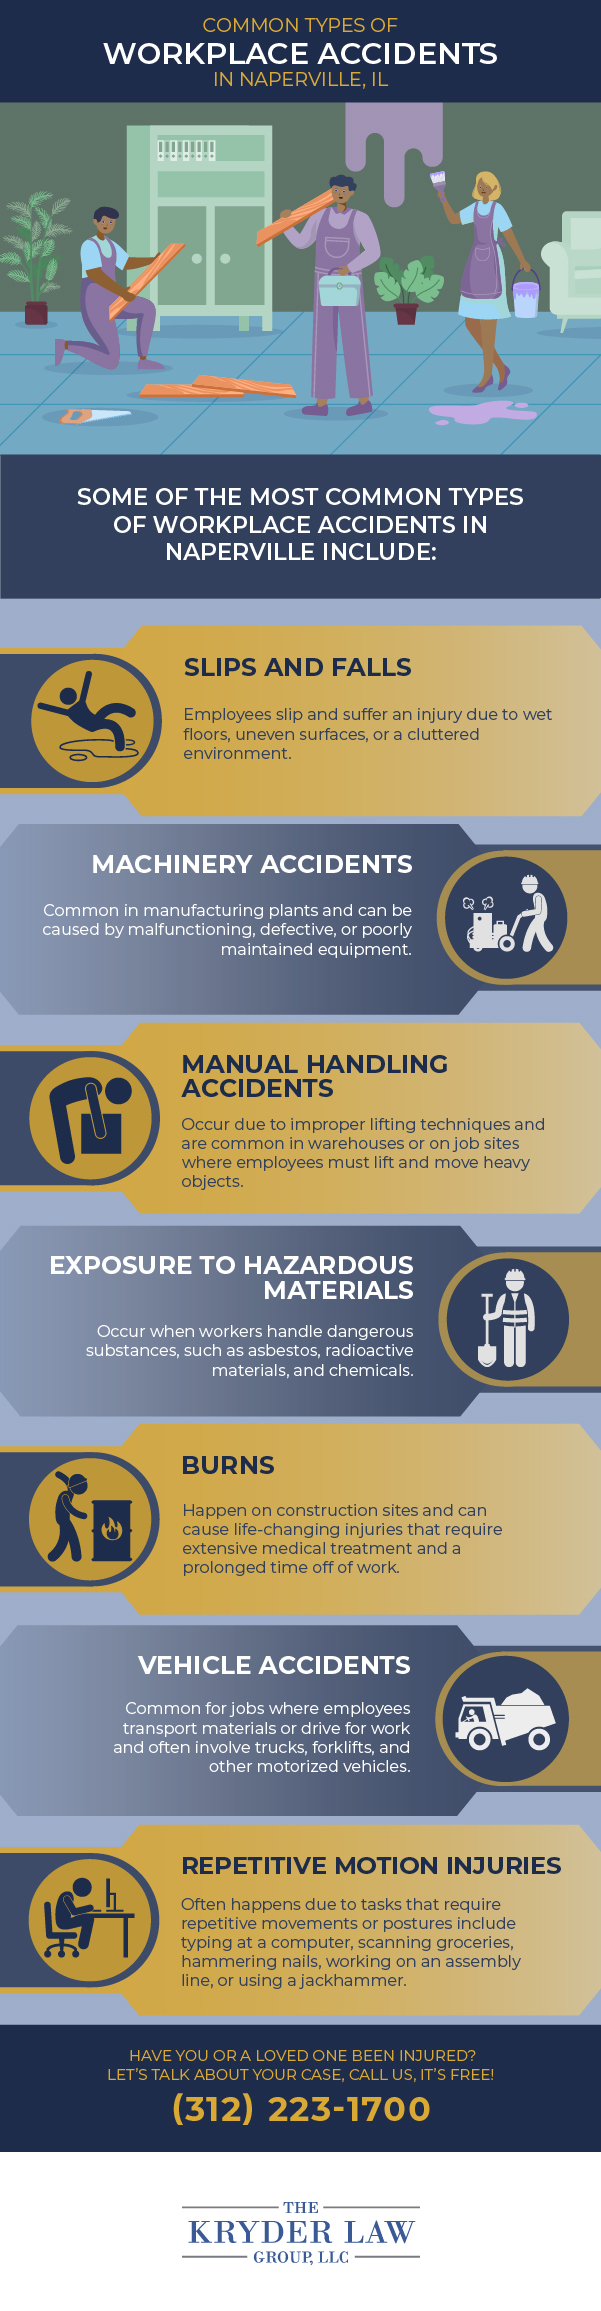 Common Types of Workplace Accidents in Naperville, IL